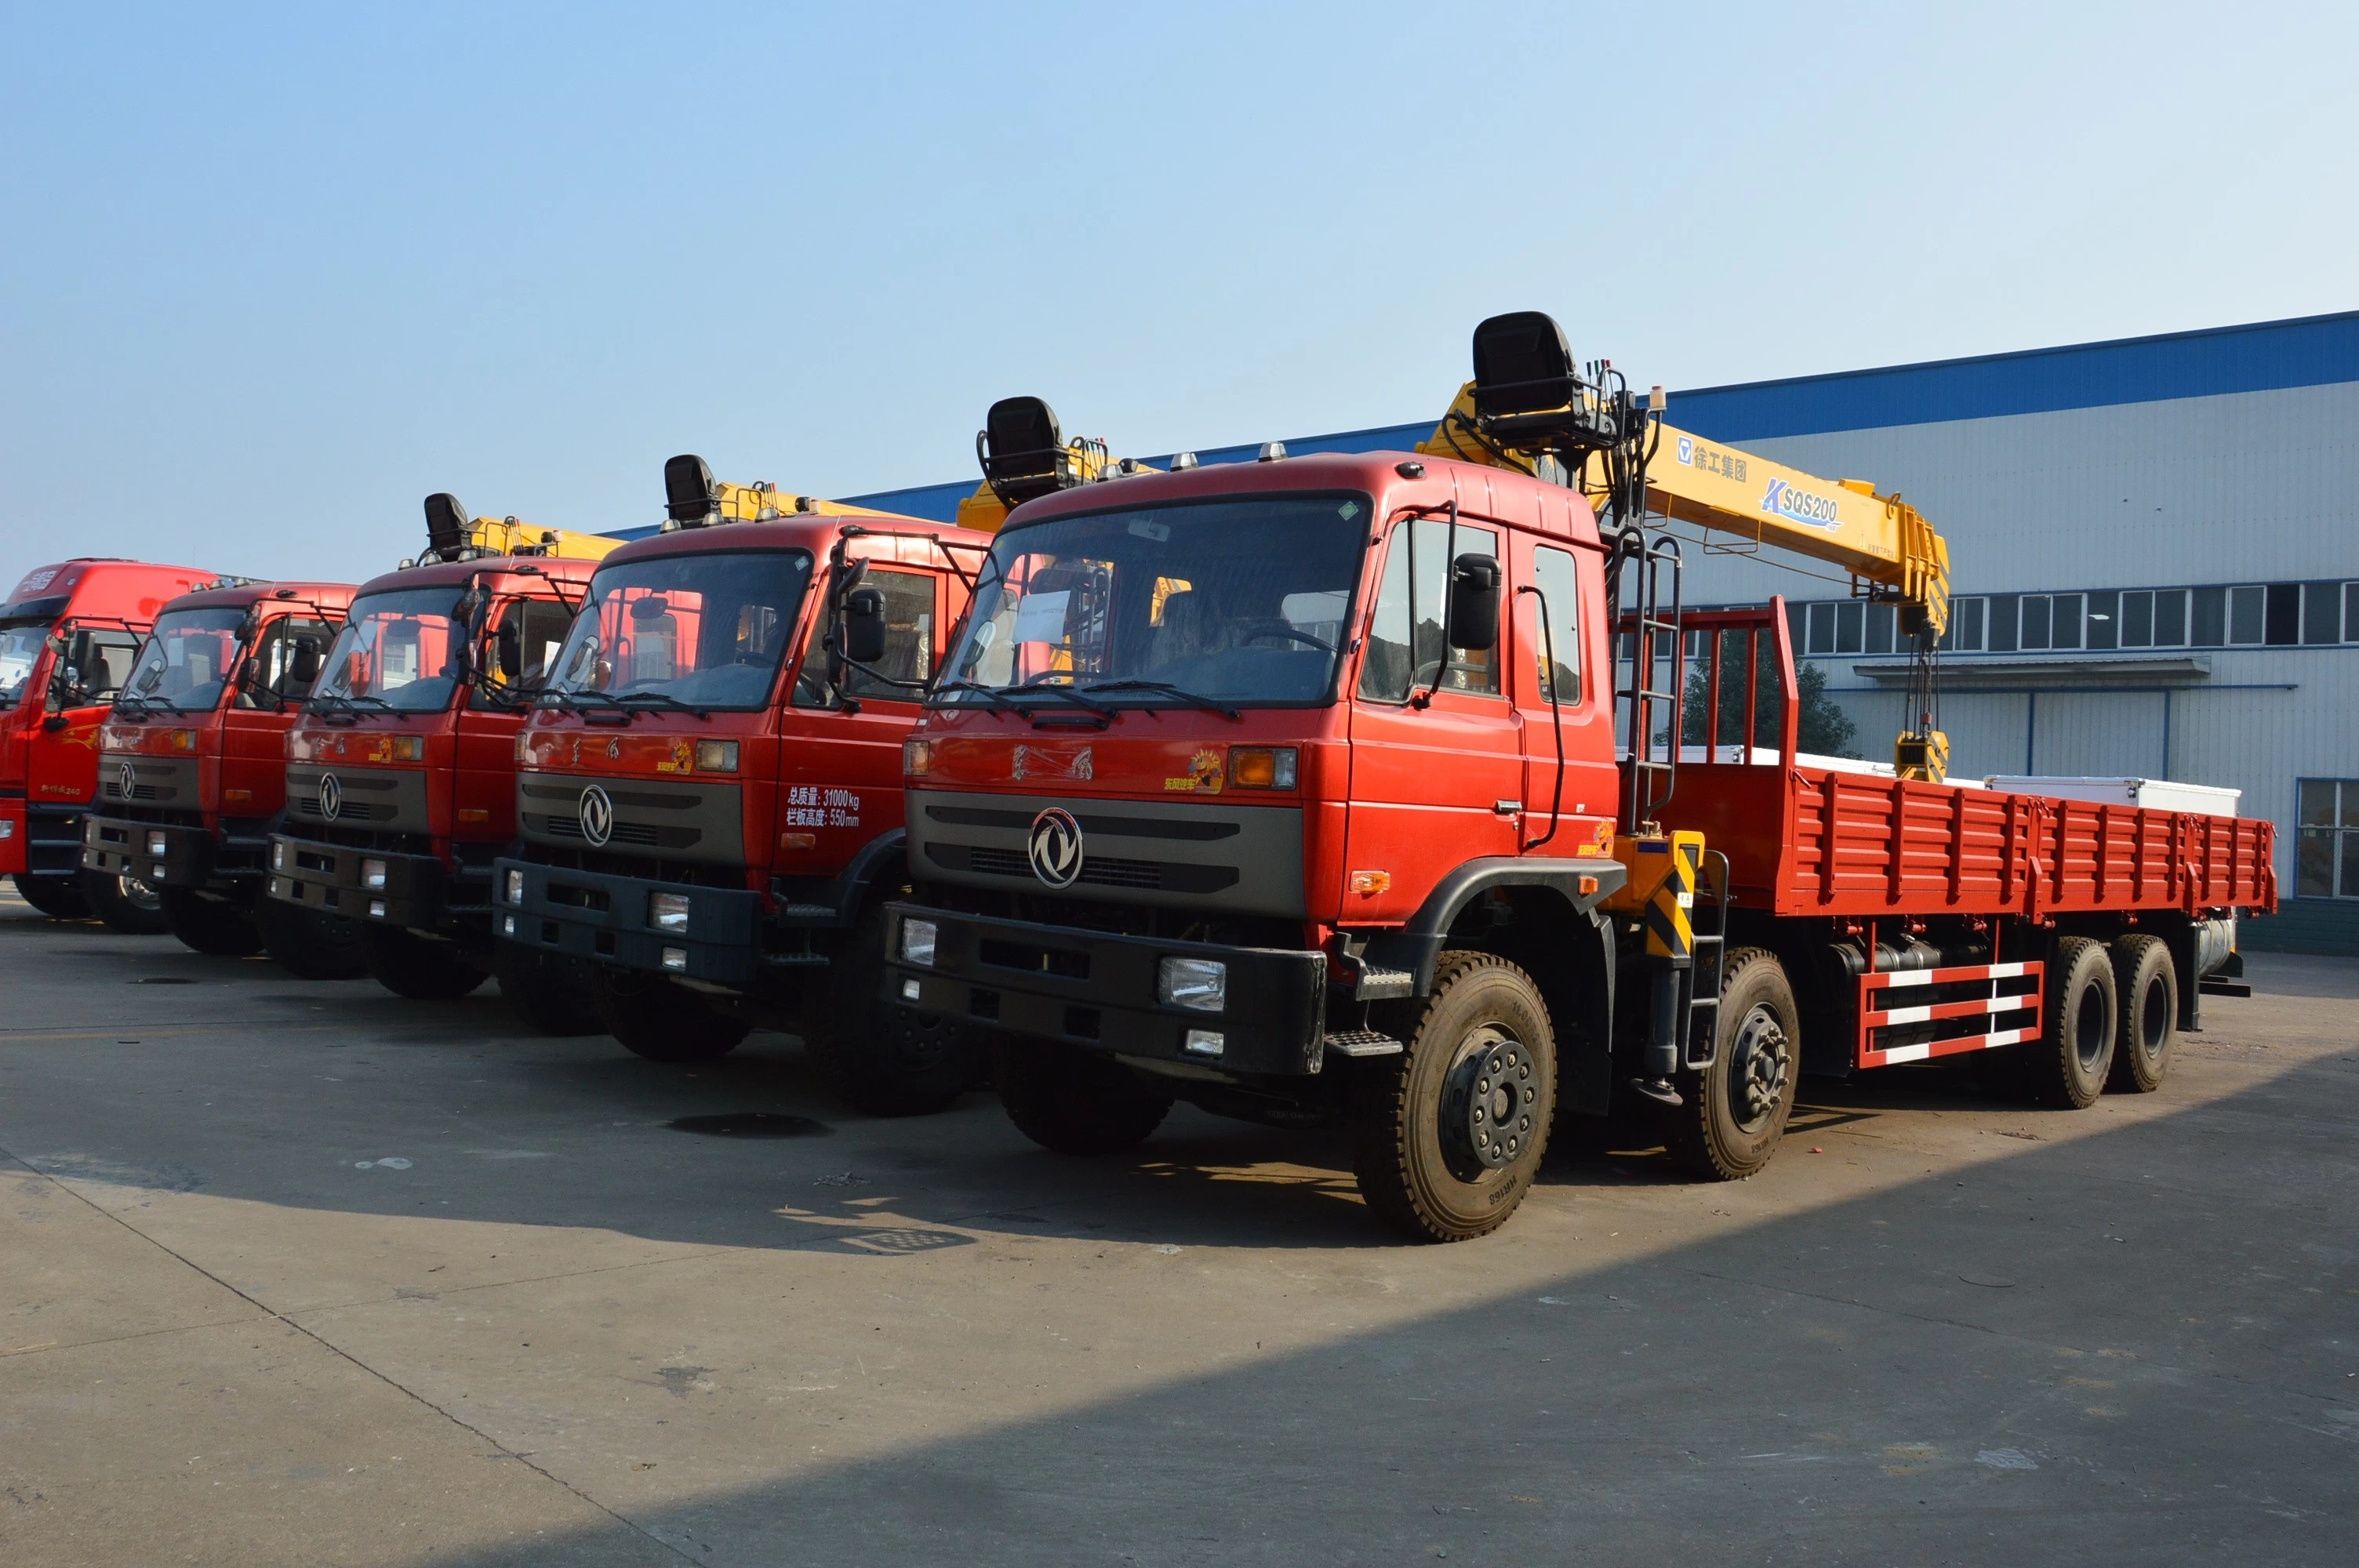 CRANE WITH TRUCK,our web is www.chinatrucksupplier.com